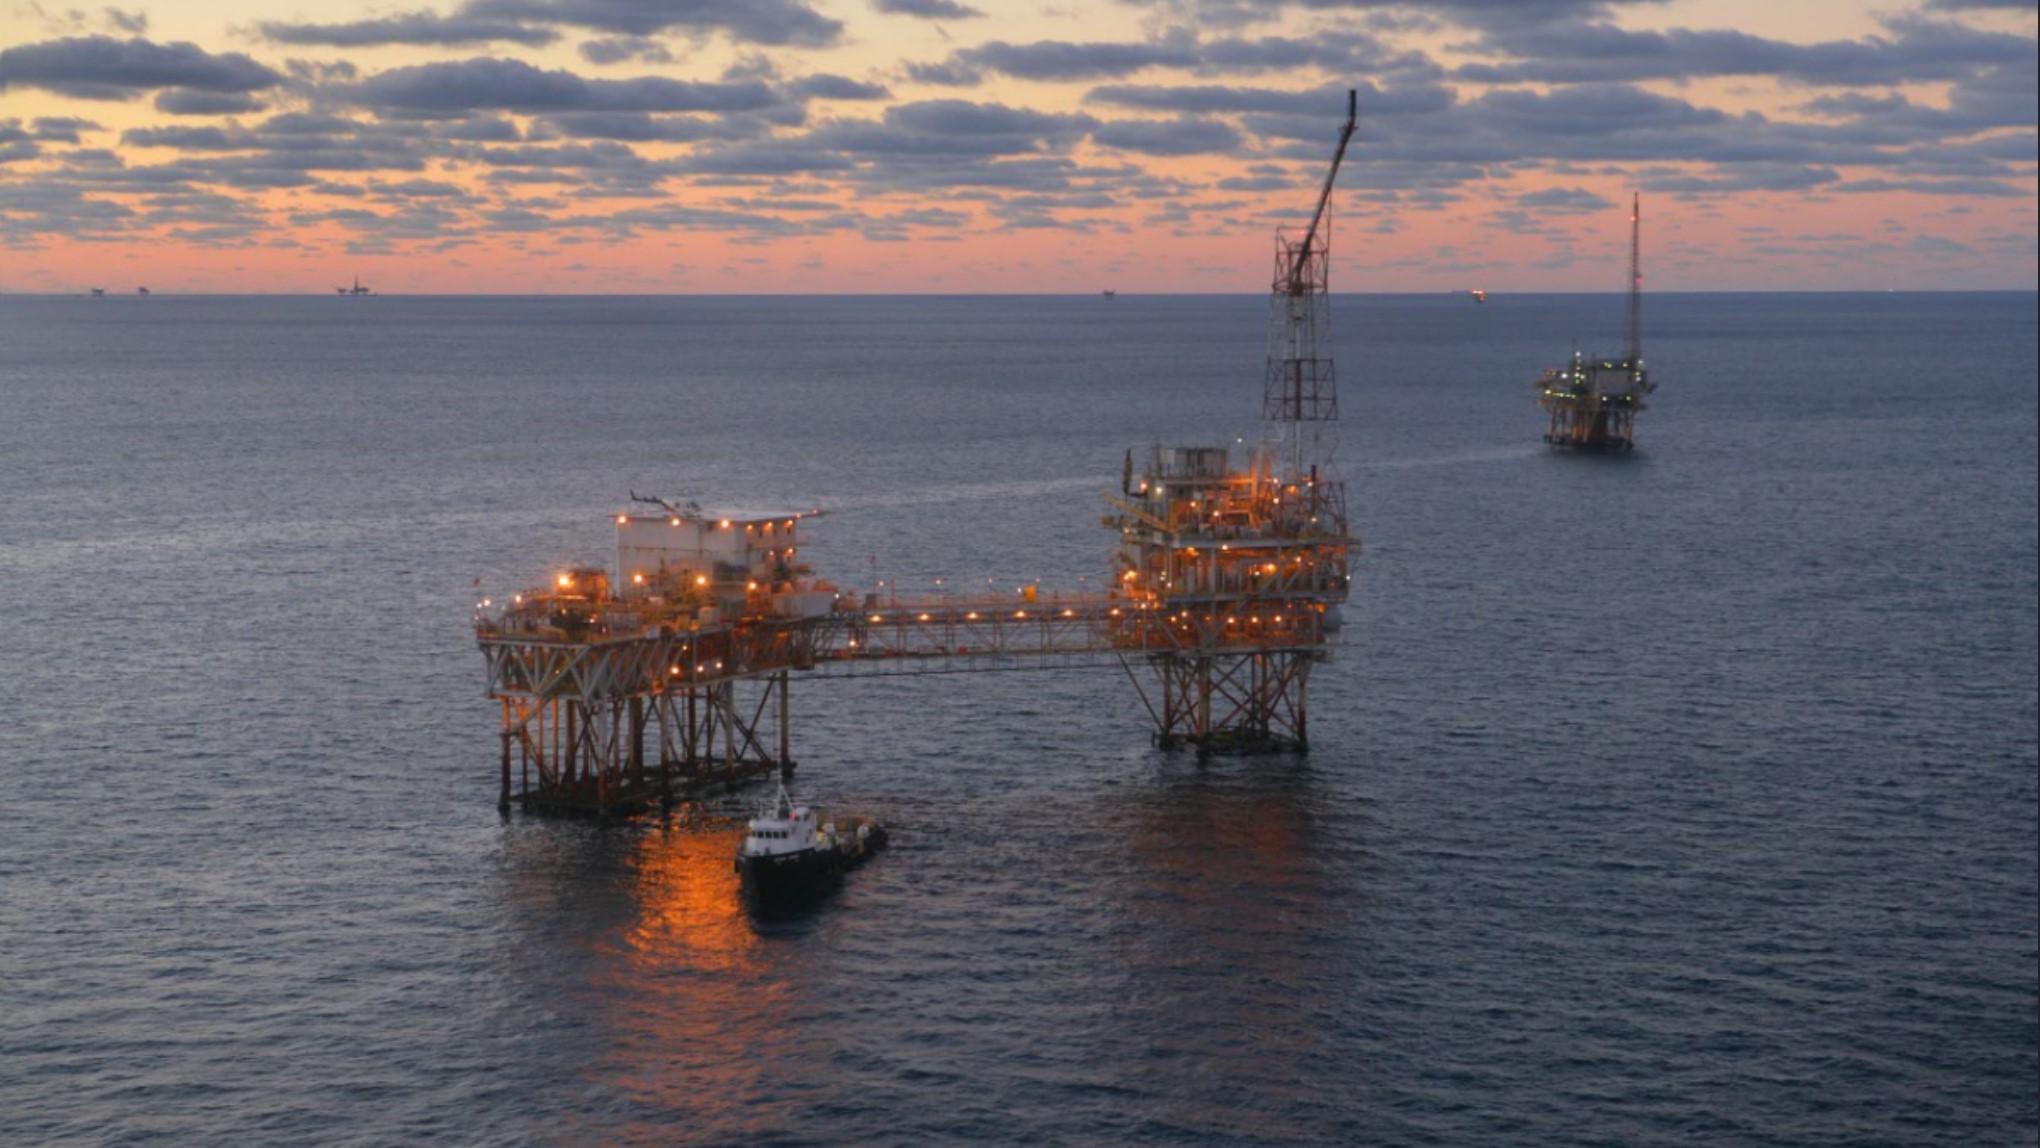 Committed to Safety & Focused on the </br>Production of Your Oil & Gas Assets.